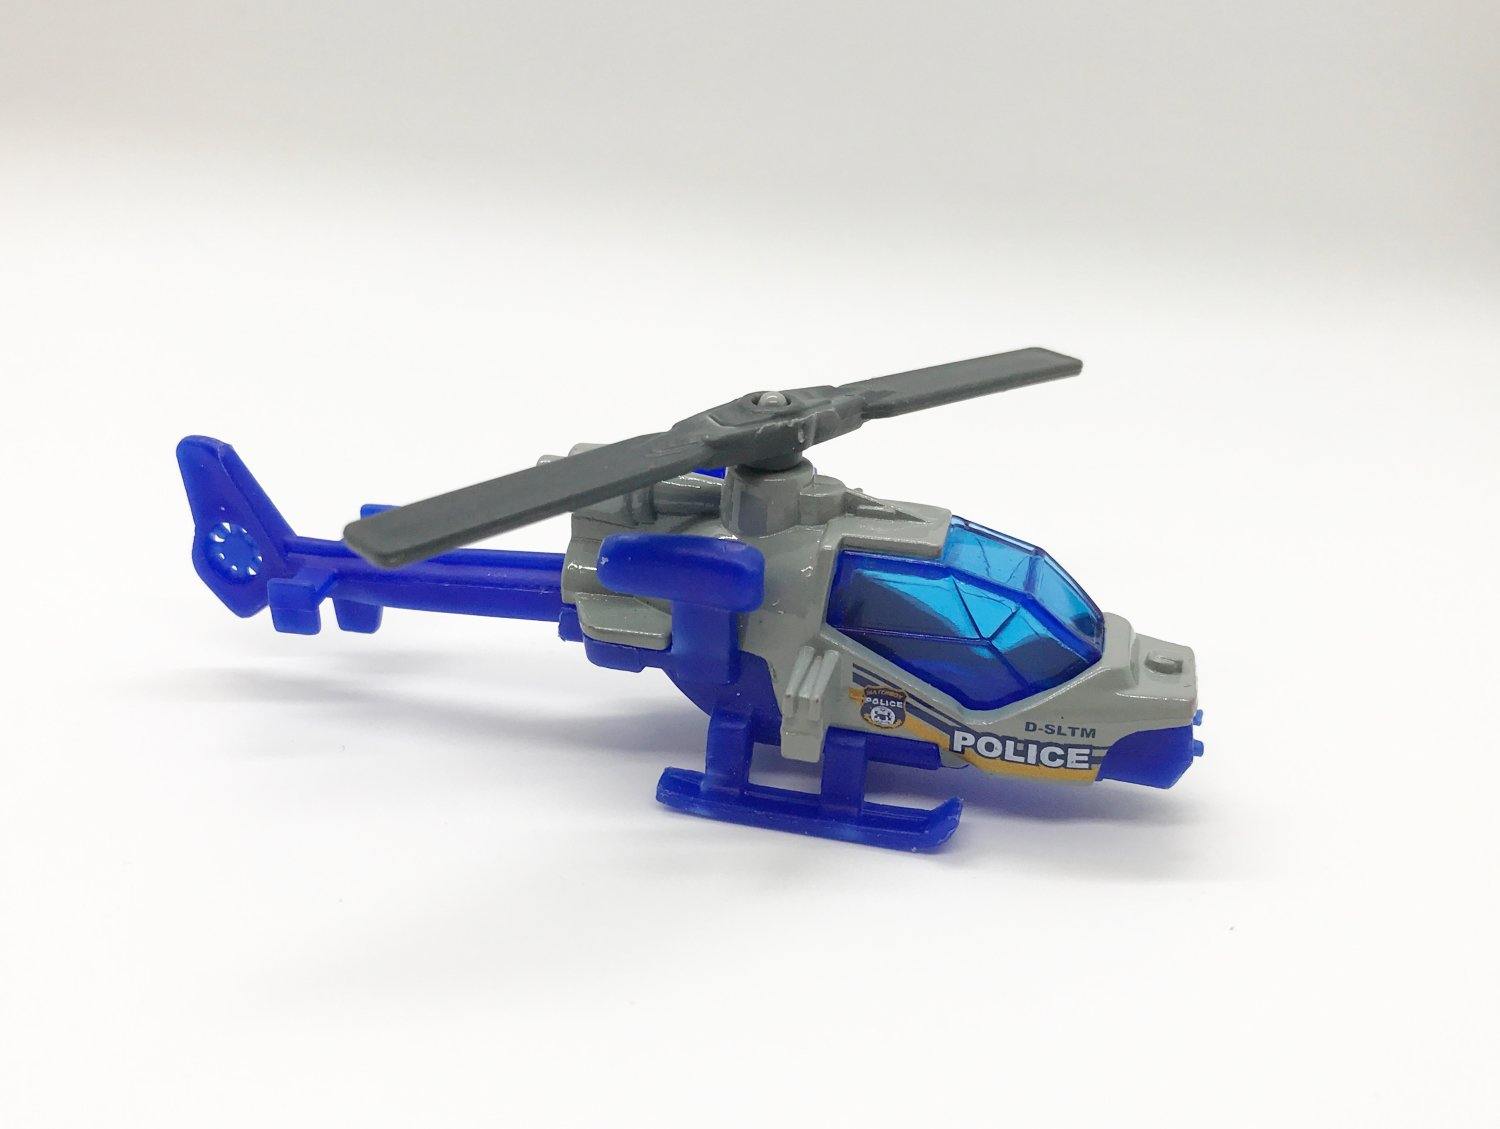 Matchbox Police Team Blue and Gray Mission Helicopter (2012) - Lamoree’s Vintage